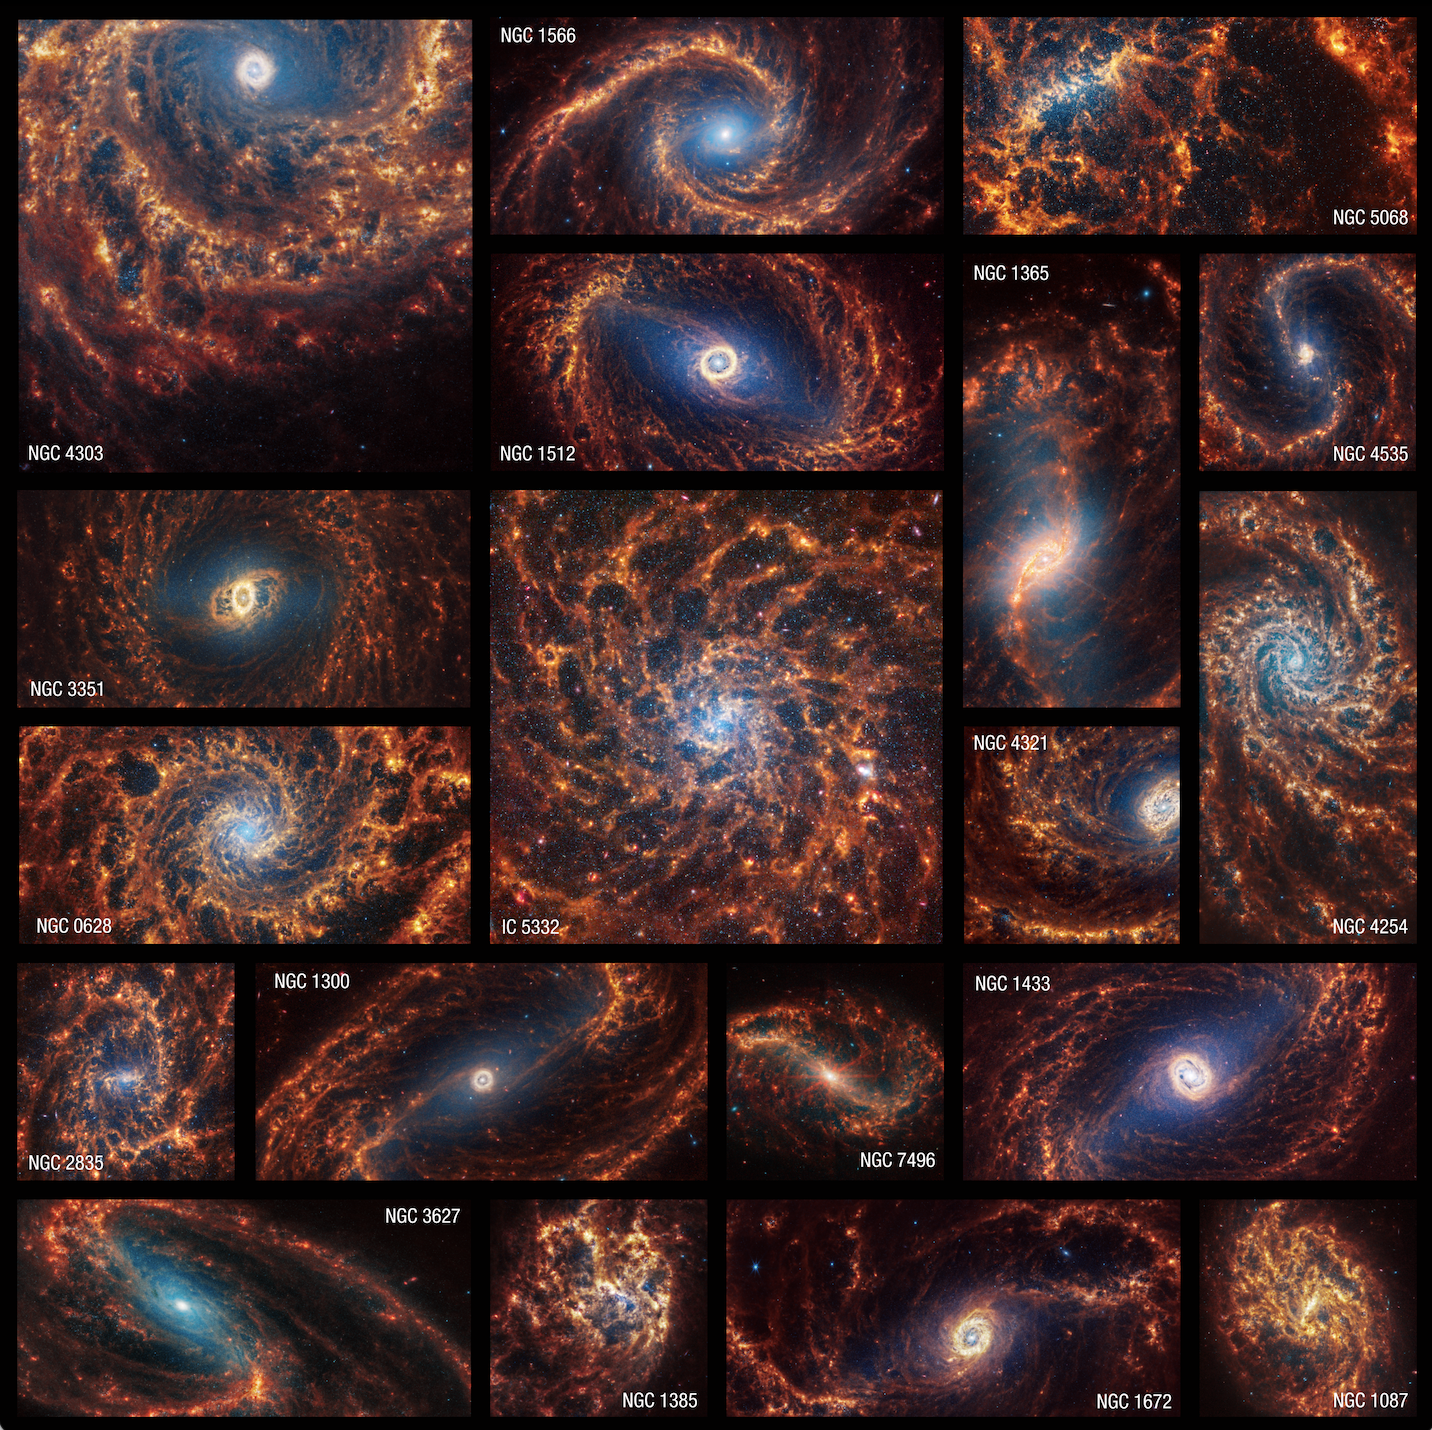 An Illustration of multiple spiral galaxies, captured by the James Webb Telescope